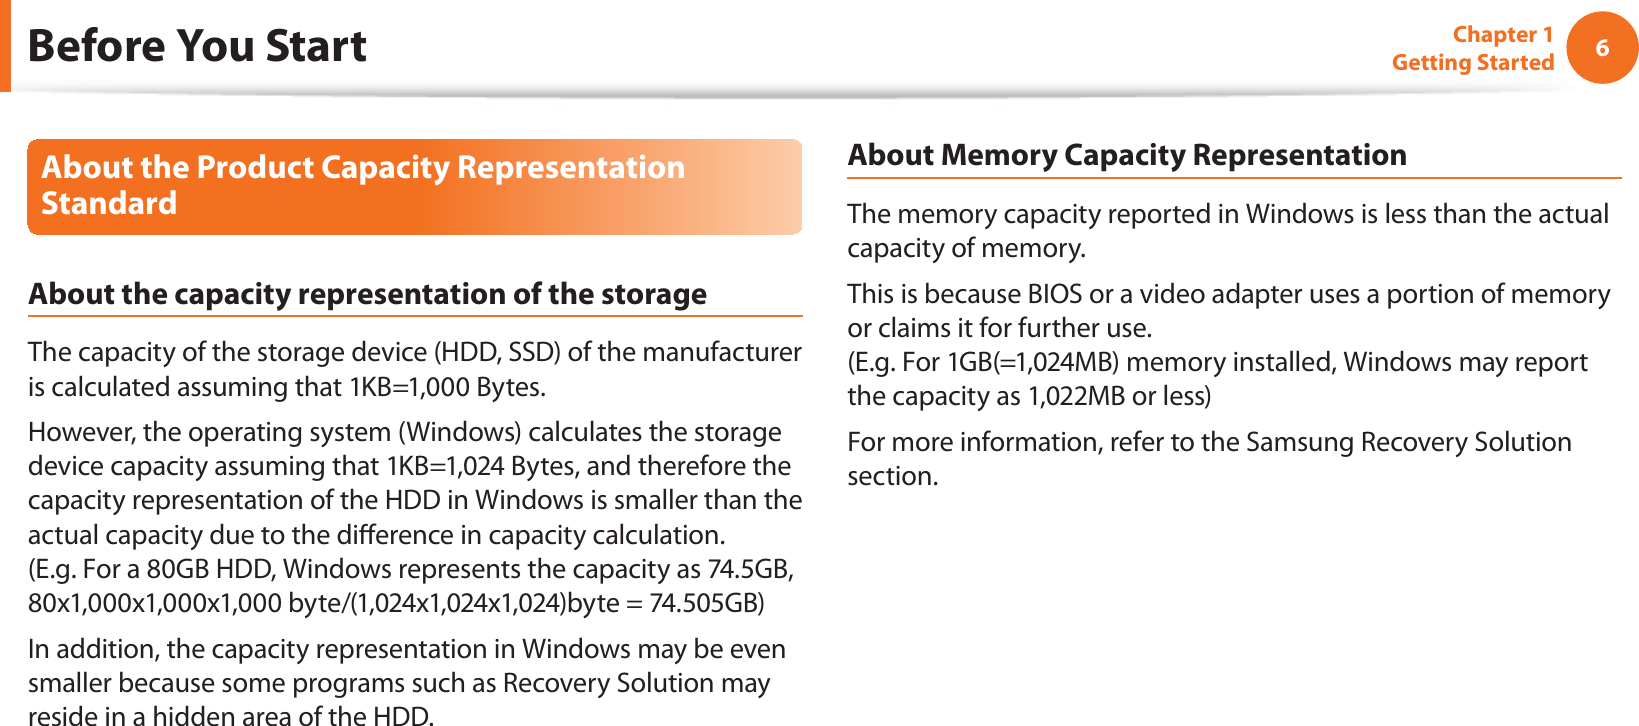 6Chapter 1 Getting StartedAbout the Product Capacity Representation StandardAbout the capacity representation of the storageThe capacity of the storage device (HDD, SSD) of the manufacturer is calculated assuming that 1KB=1,000 Bytes.However, the operating system (Windows) calculates the storage device capacity assuming that 1KB=1,024 Bytes, and therefore the capacity representation of the HDD in Windows is smaller than the actual capacity due to the dierence in capacity calculation.  (E.g. For a 80GB HDD, Windows represents the capacity as 74.5GB, 80x1,000x1,000x1,000 byte/(1,024x1,024x1,024)byte = 74.505GB)In addition, the capacity representation in Windows may be even smaller because some programs such as Recovery Solution may reside in a hidden area of the HDD.About Memory Capacity RepresentationThe memory capacity reported in Windows is less than the actual capacity of memory.This is because BIOS or a video adapter uses a portion of memory or claims it for further use. (E.g. For 1GB(=1,024MB) memory installed, Windows may report the capacity as 1,022MB or less)For more information, refer to the Samsung Recovery Solution section.Before You Start